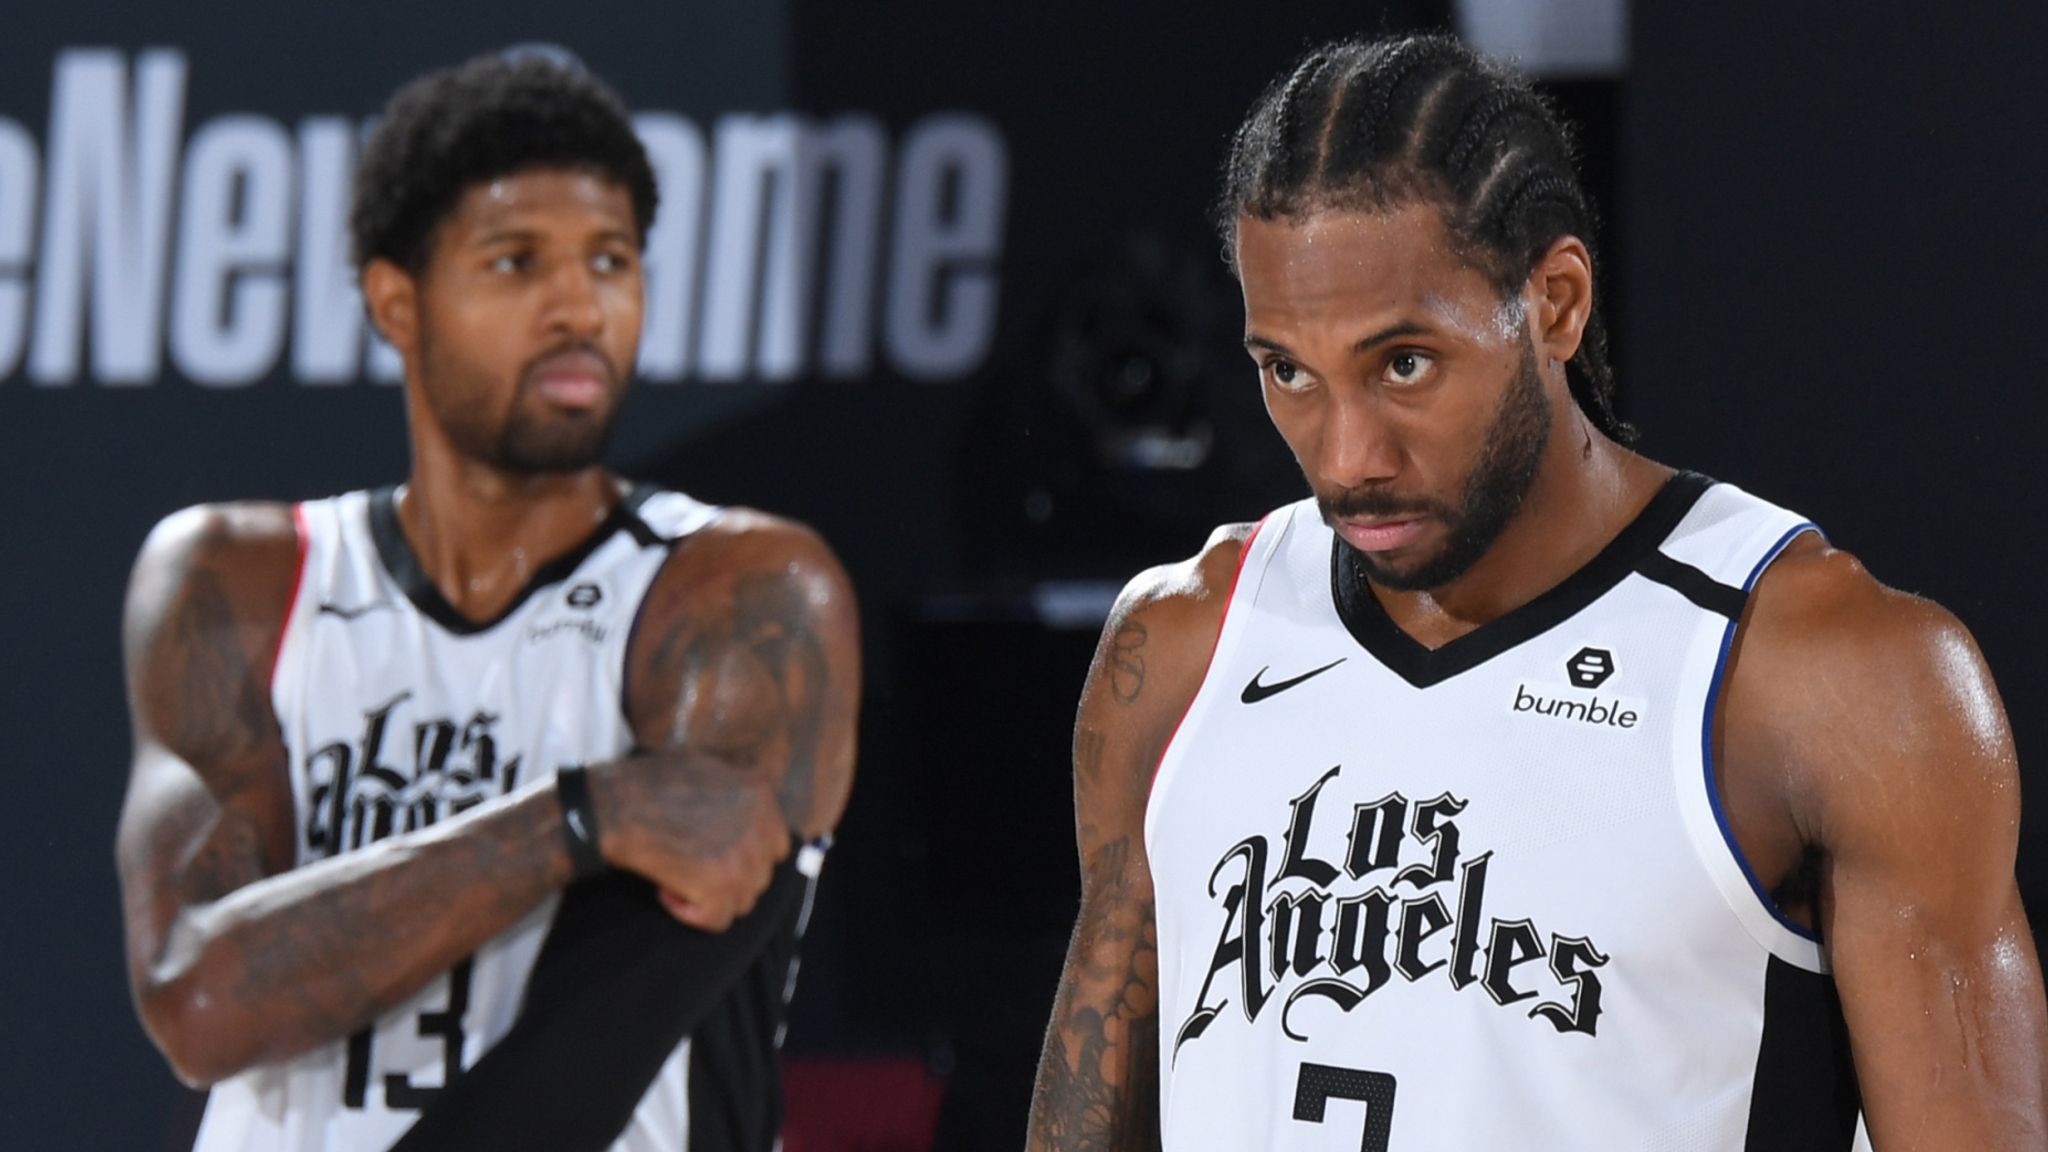 Where were you when Kawhi Leonard and Paul George became Clippers